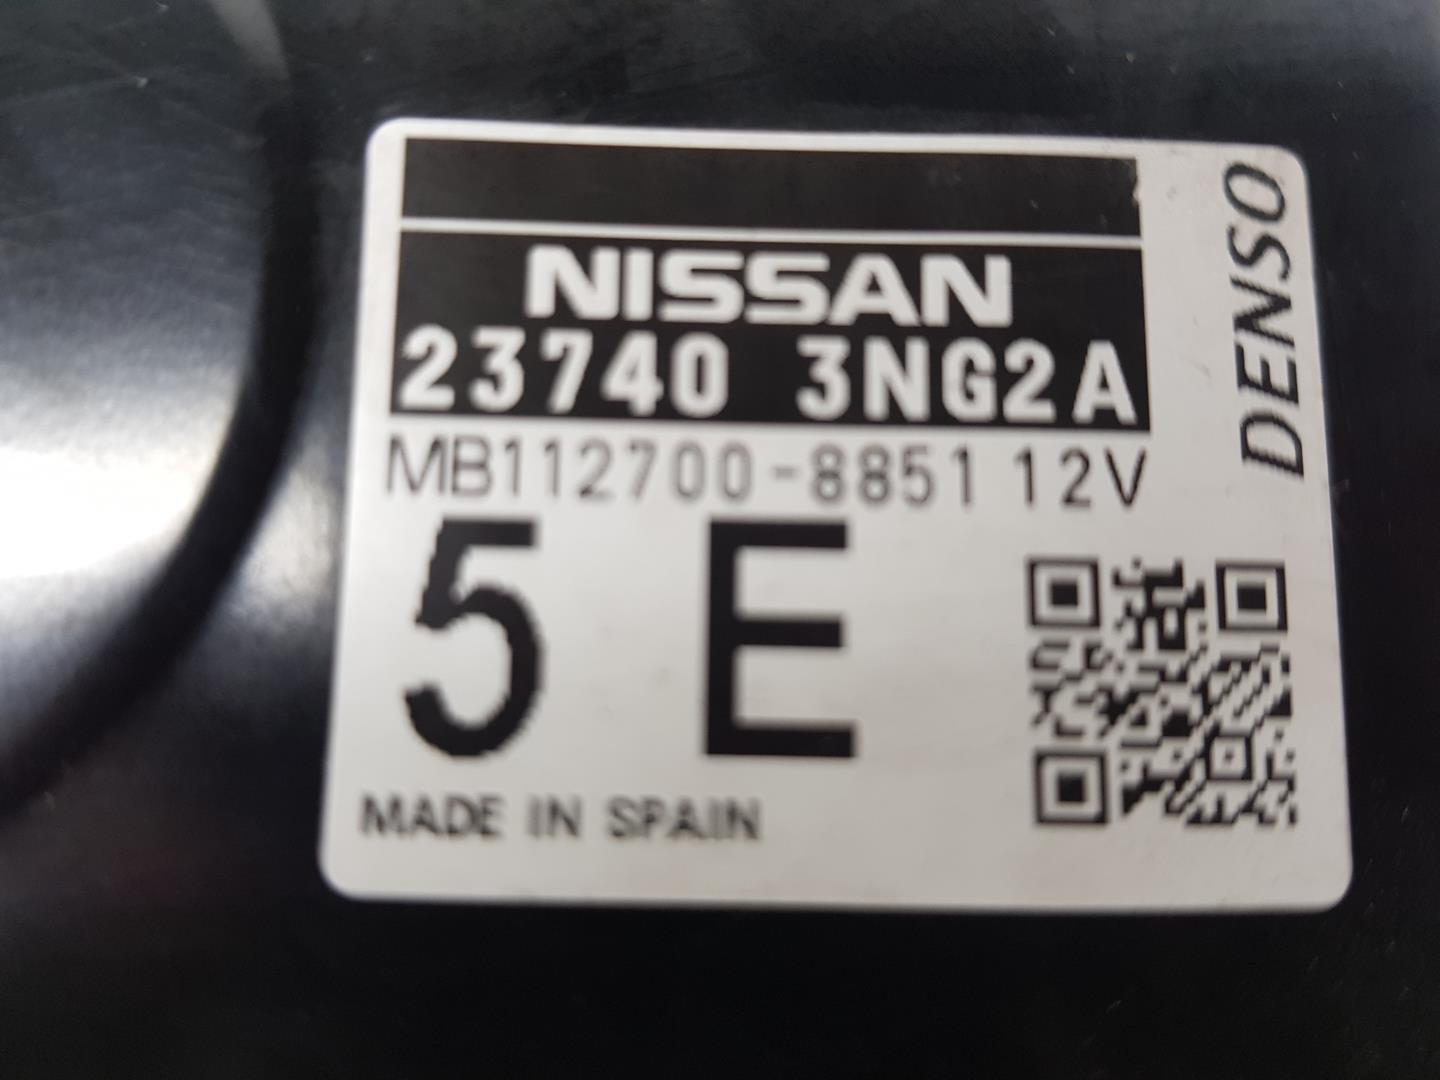 NISSAN Leaf 1 generation (2010-2017) Moottorin ohjausyksikkö ECU 237403NG2A, 237403NG2A, MATERIALNUEVO 19856722